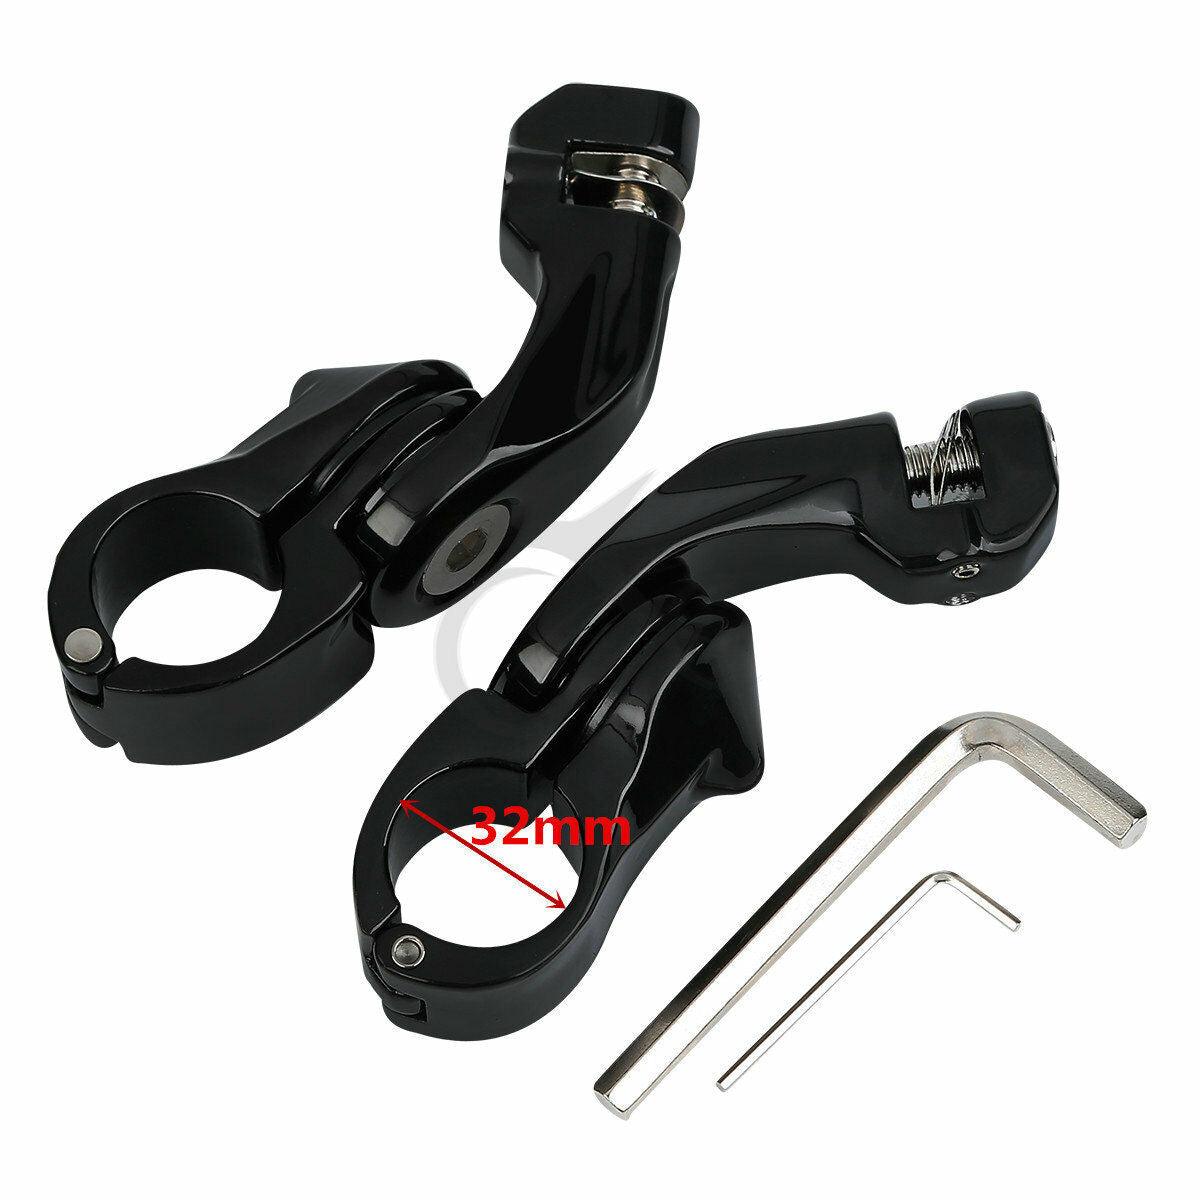 1 1/4" Airflow Engine Guard Footpegs Mount Fit For Harley Touring Yamaha Suzuki - Moto Life Products